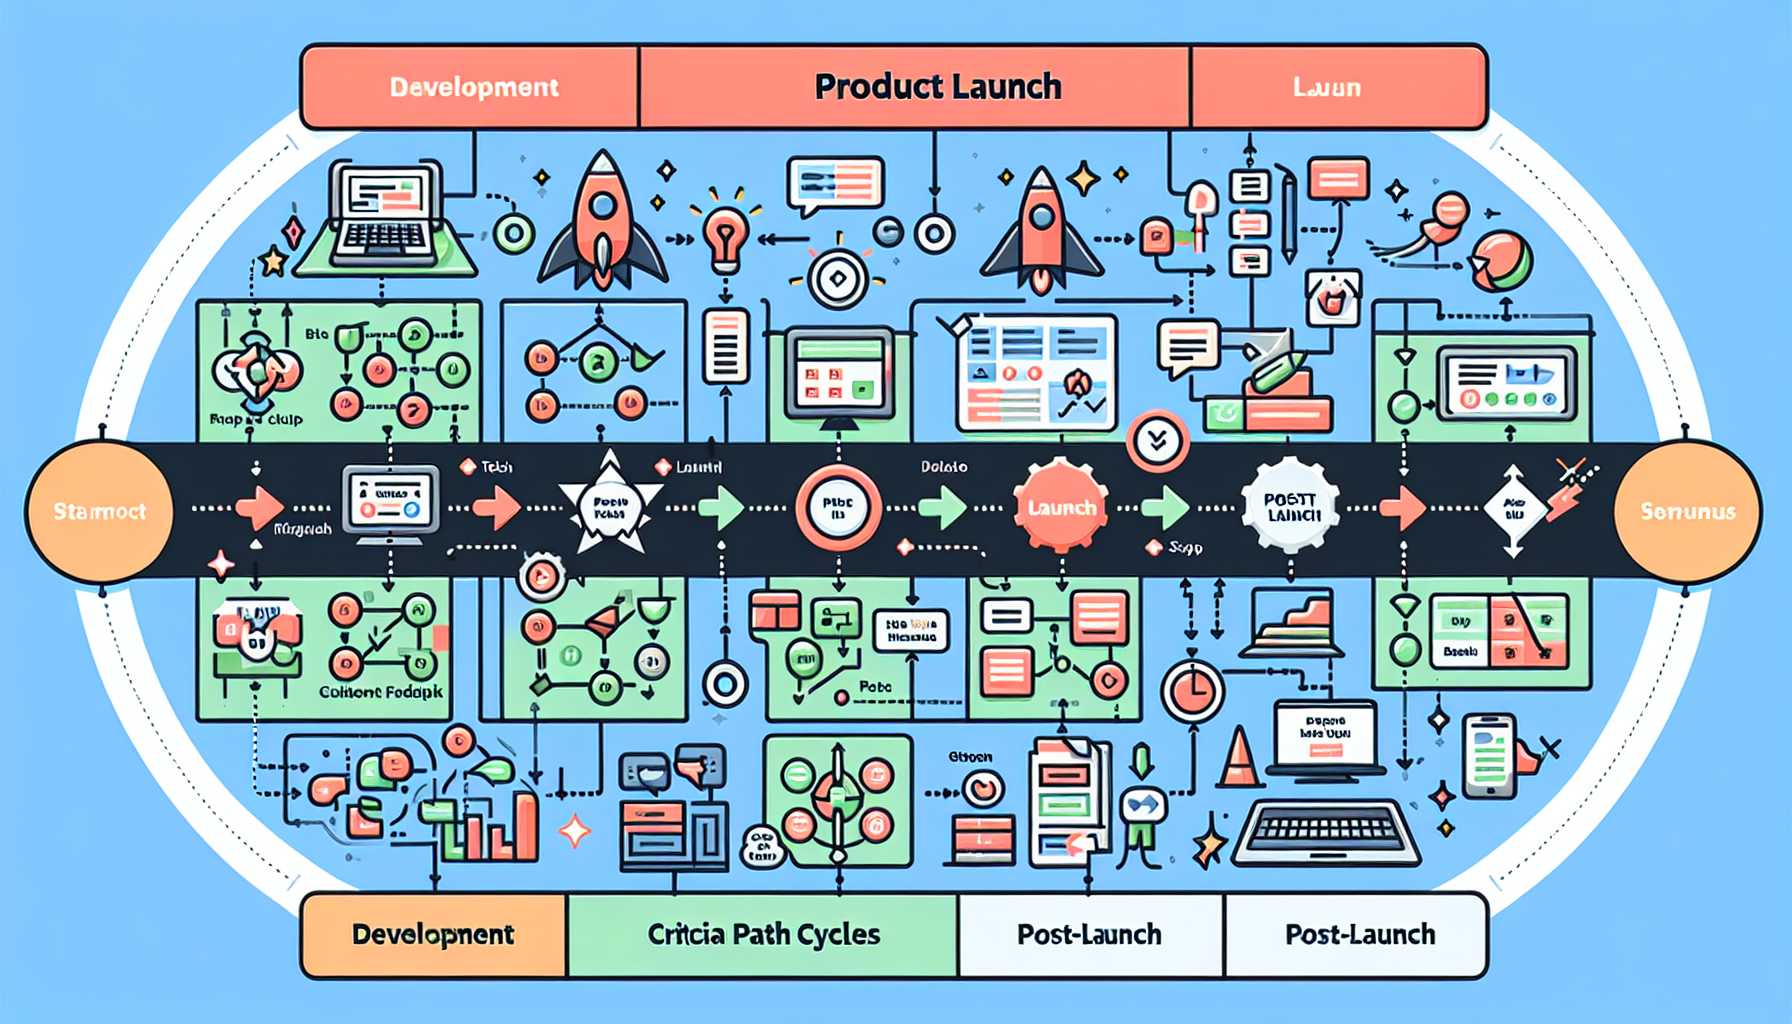 a comprehensive product launch workflow diagram with distinct development, launch, and post-launch phases, including agile cycles and critical path milestones for a tech product